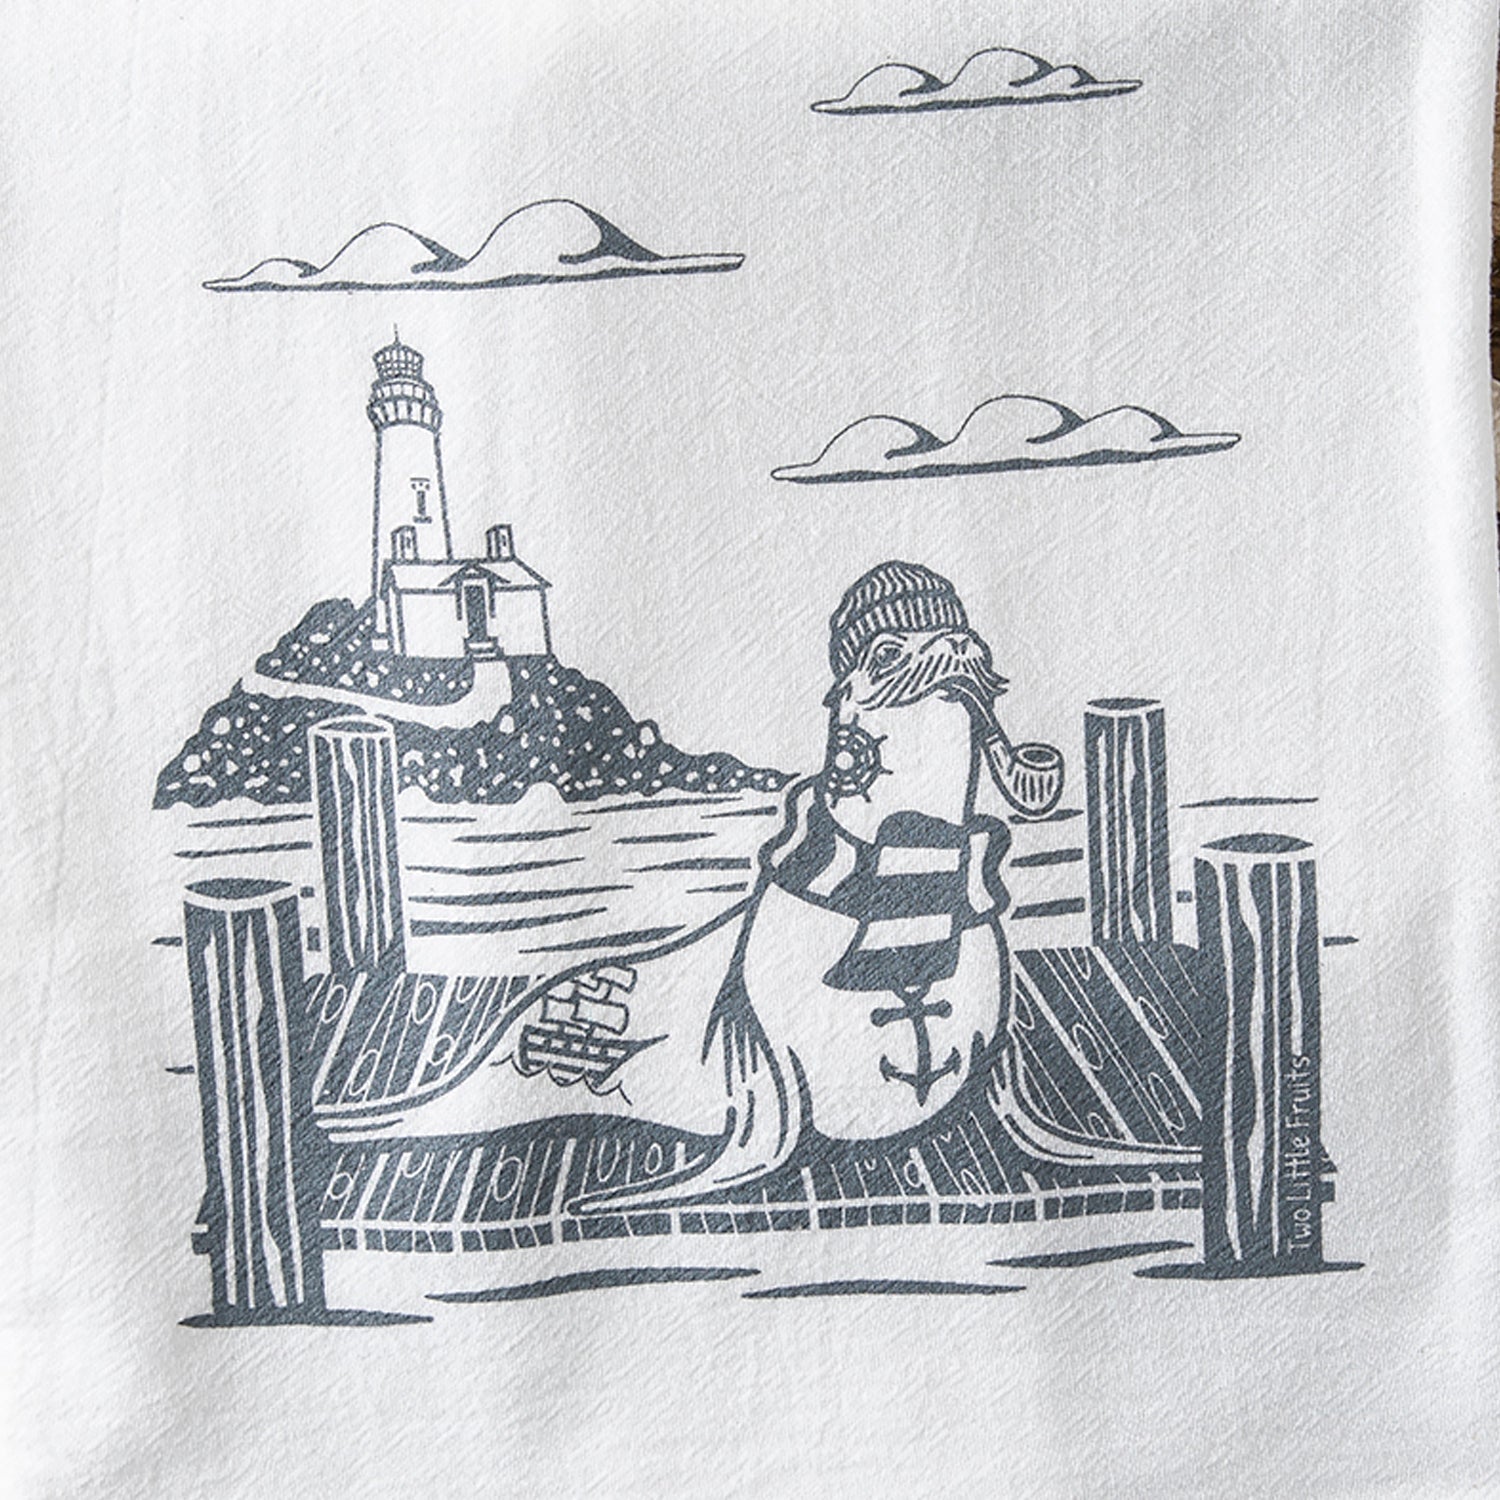 Skipper the Sea Lion and Puffy the Blowfish Tea Towel Set - Two Little Fruits